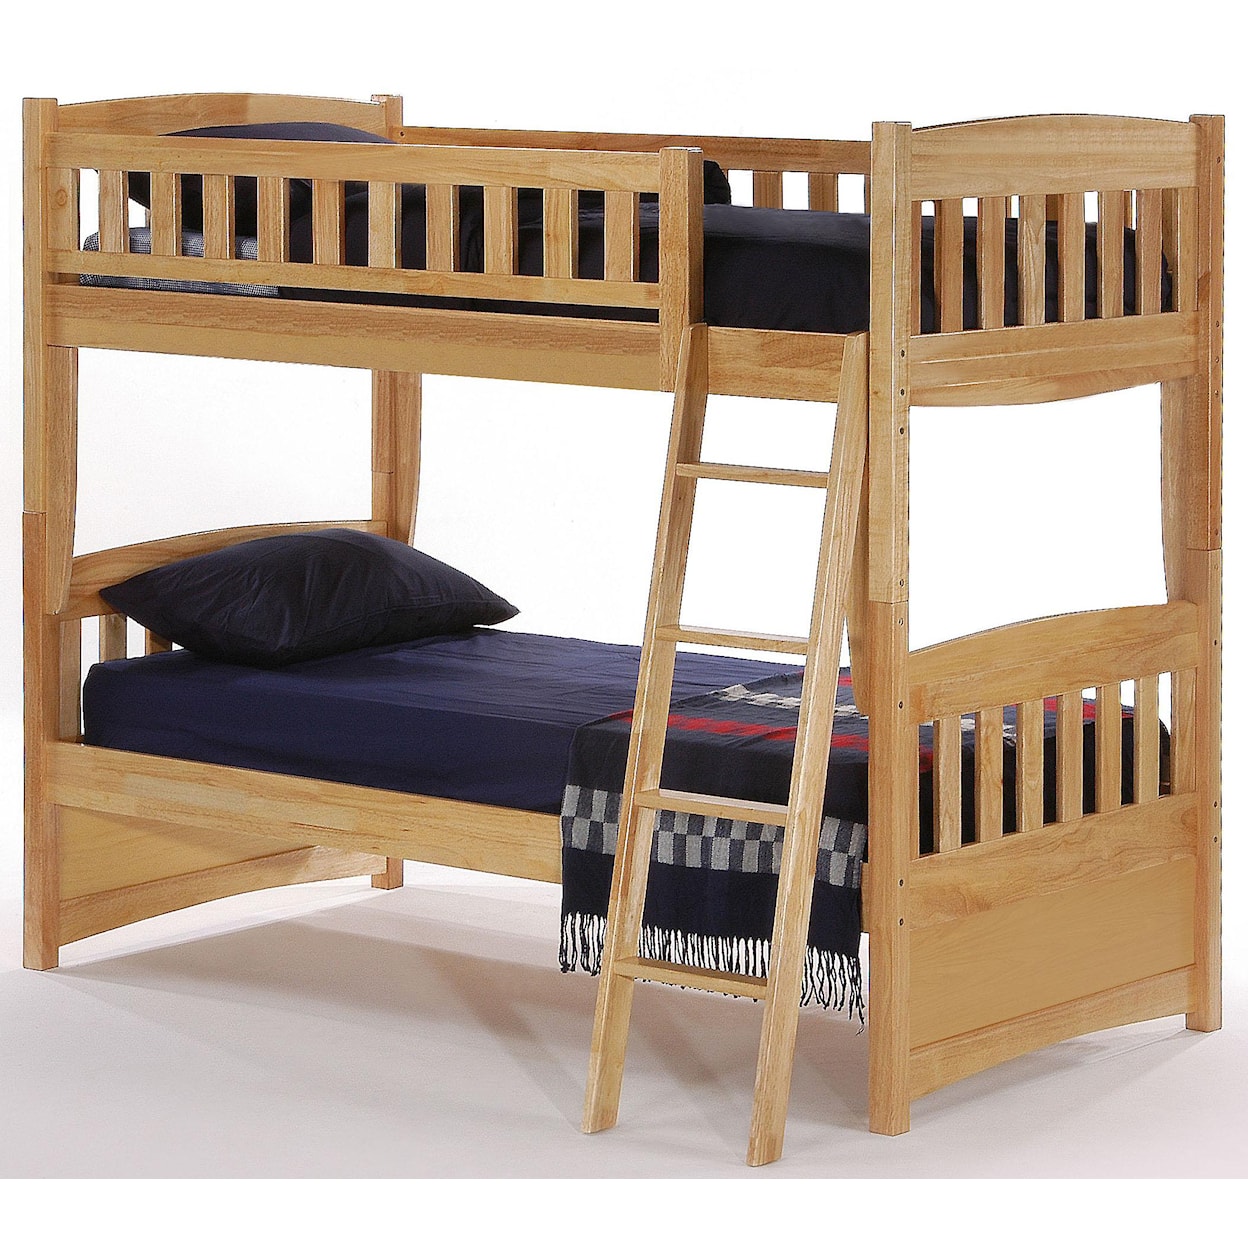 Night & Day Furniture Spice Twin Bunk Bed